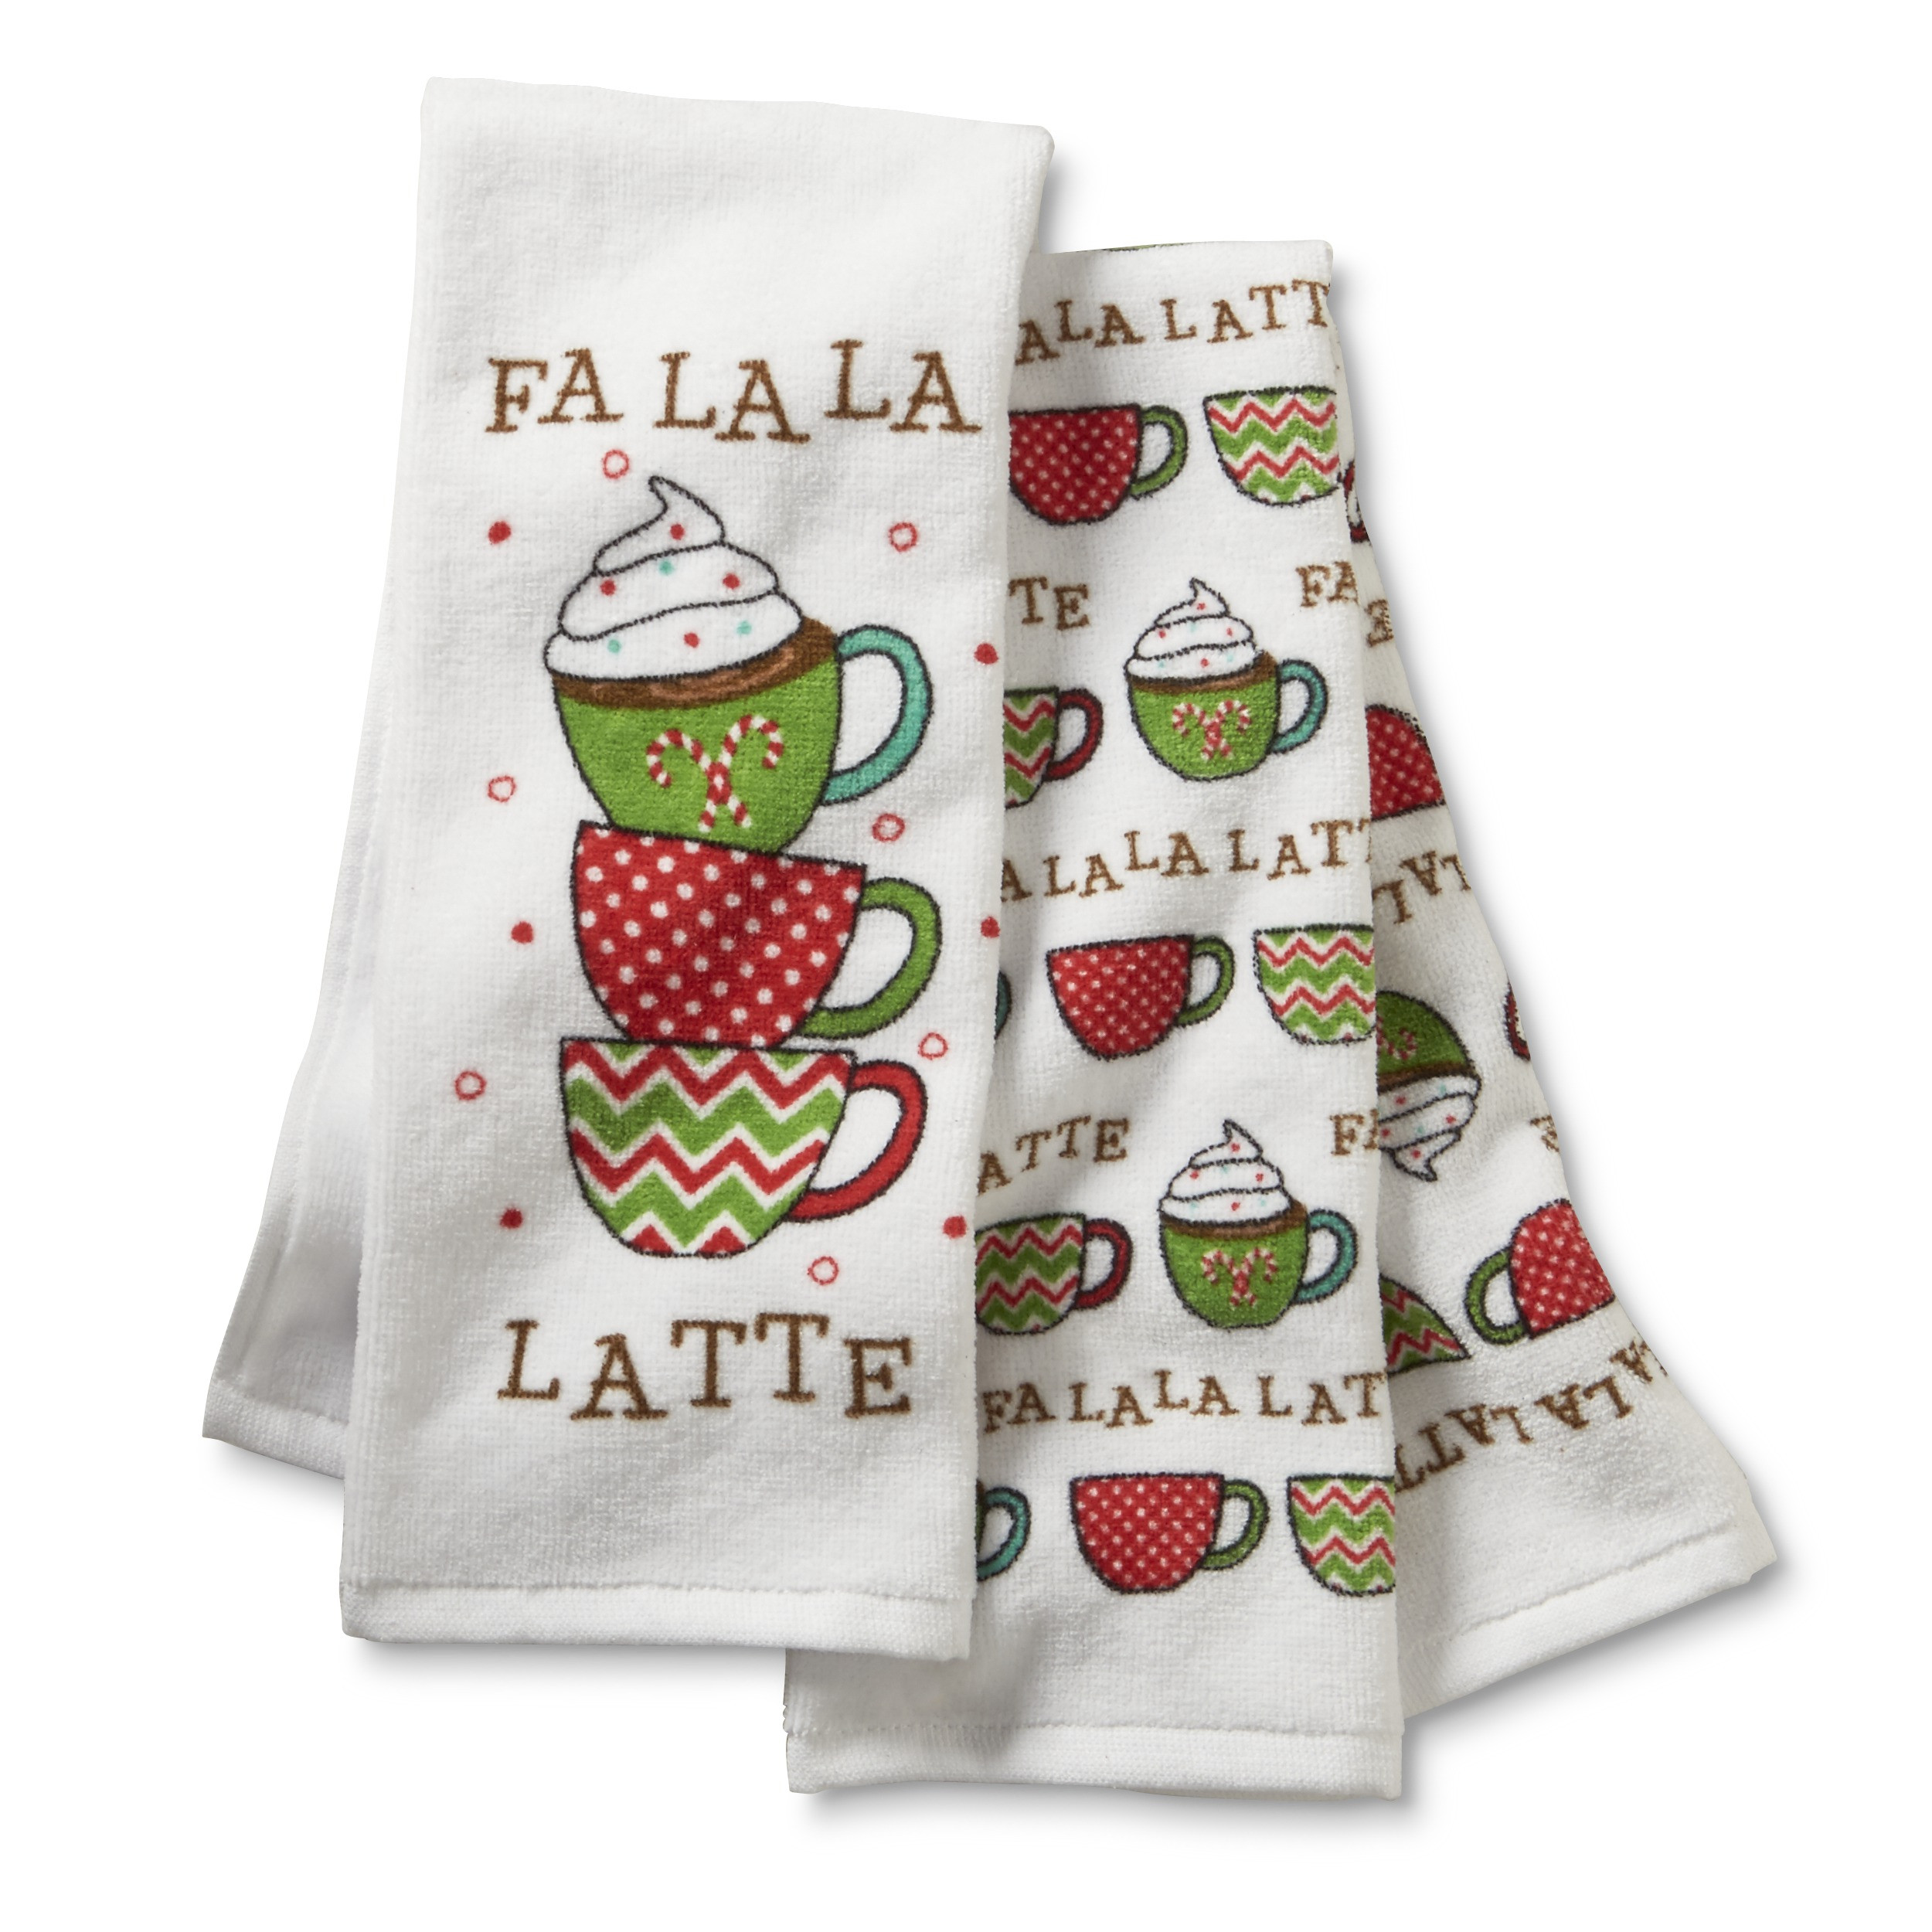 Christmas Kitchen Towels
 Trim A Home 2 Pack Christmas Kitchen Towels Fa La La